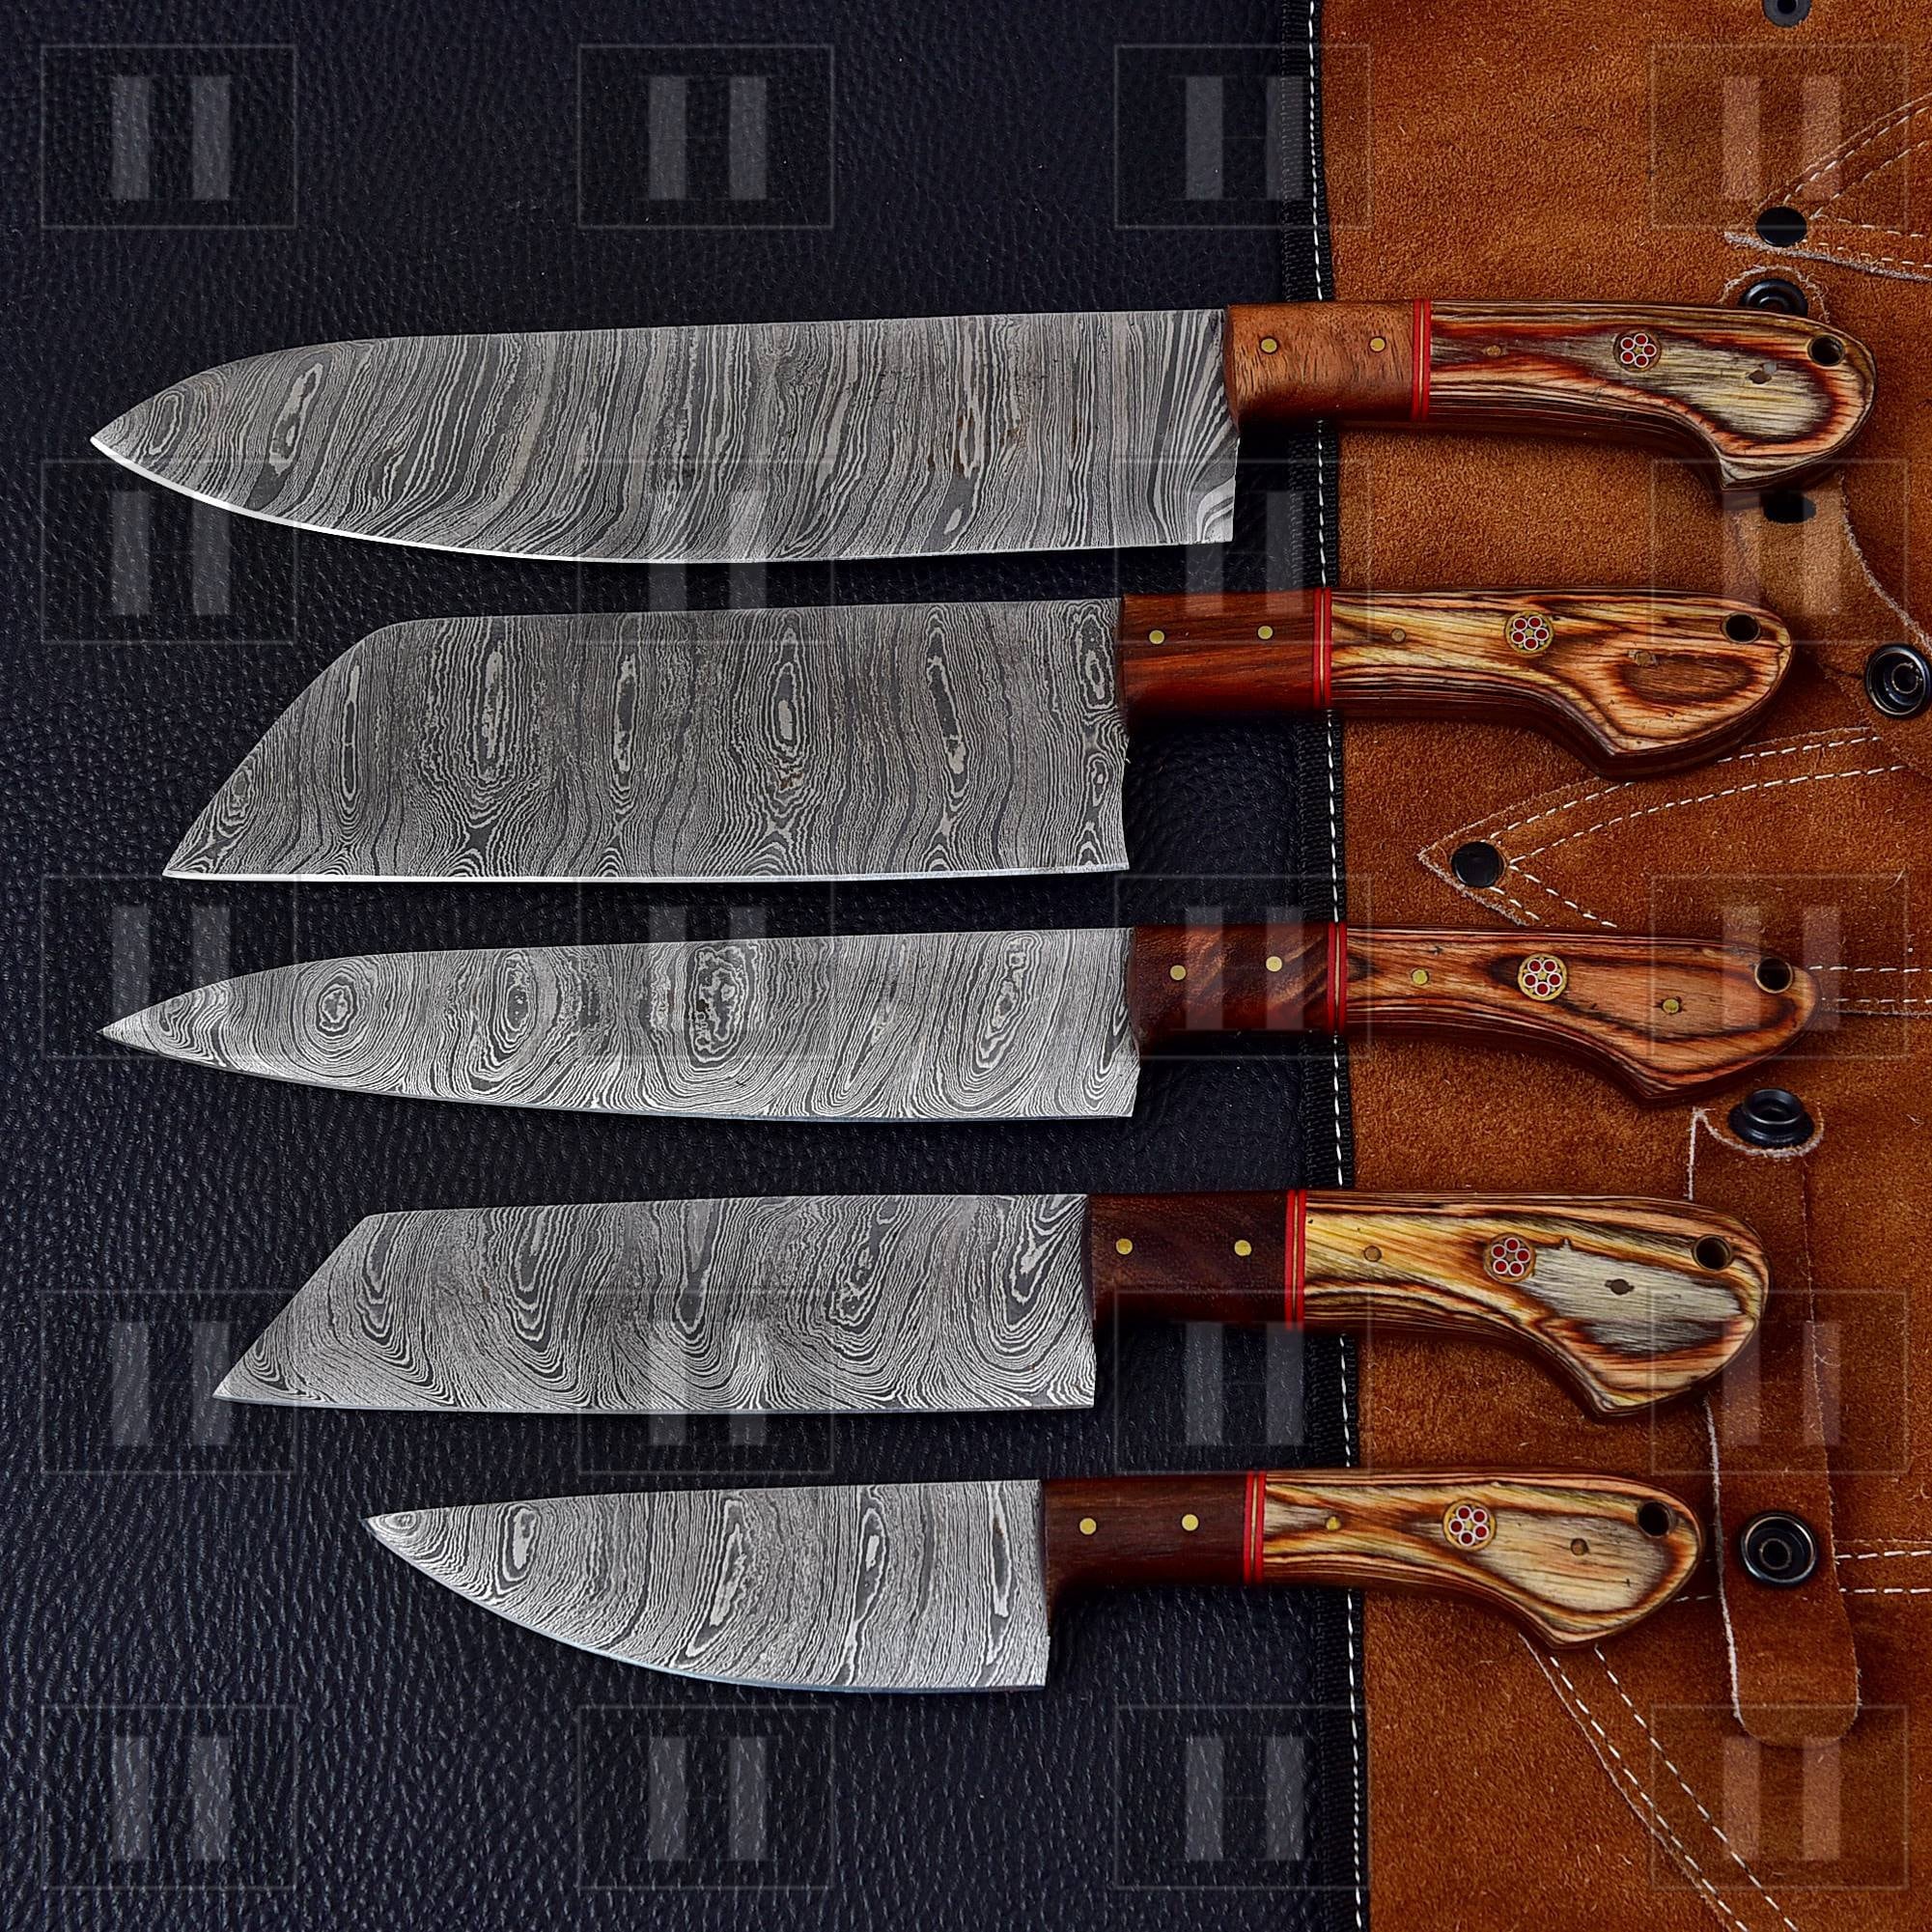 5 pieces chef knives set, Chef knife, Santoku knife, Peel knife, vegetable  knife, overall 54 inches full tang hand forged Damascus steel blade, custom